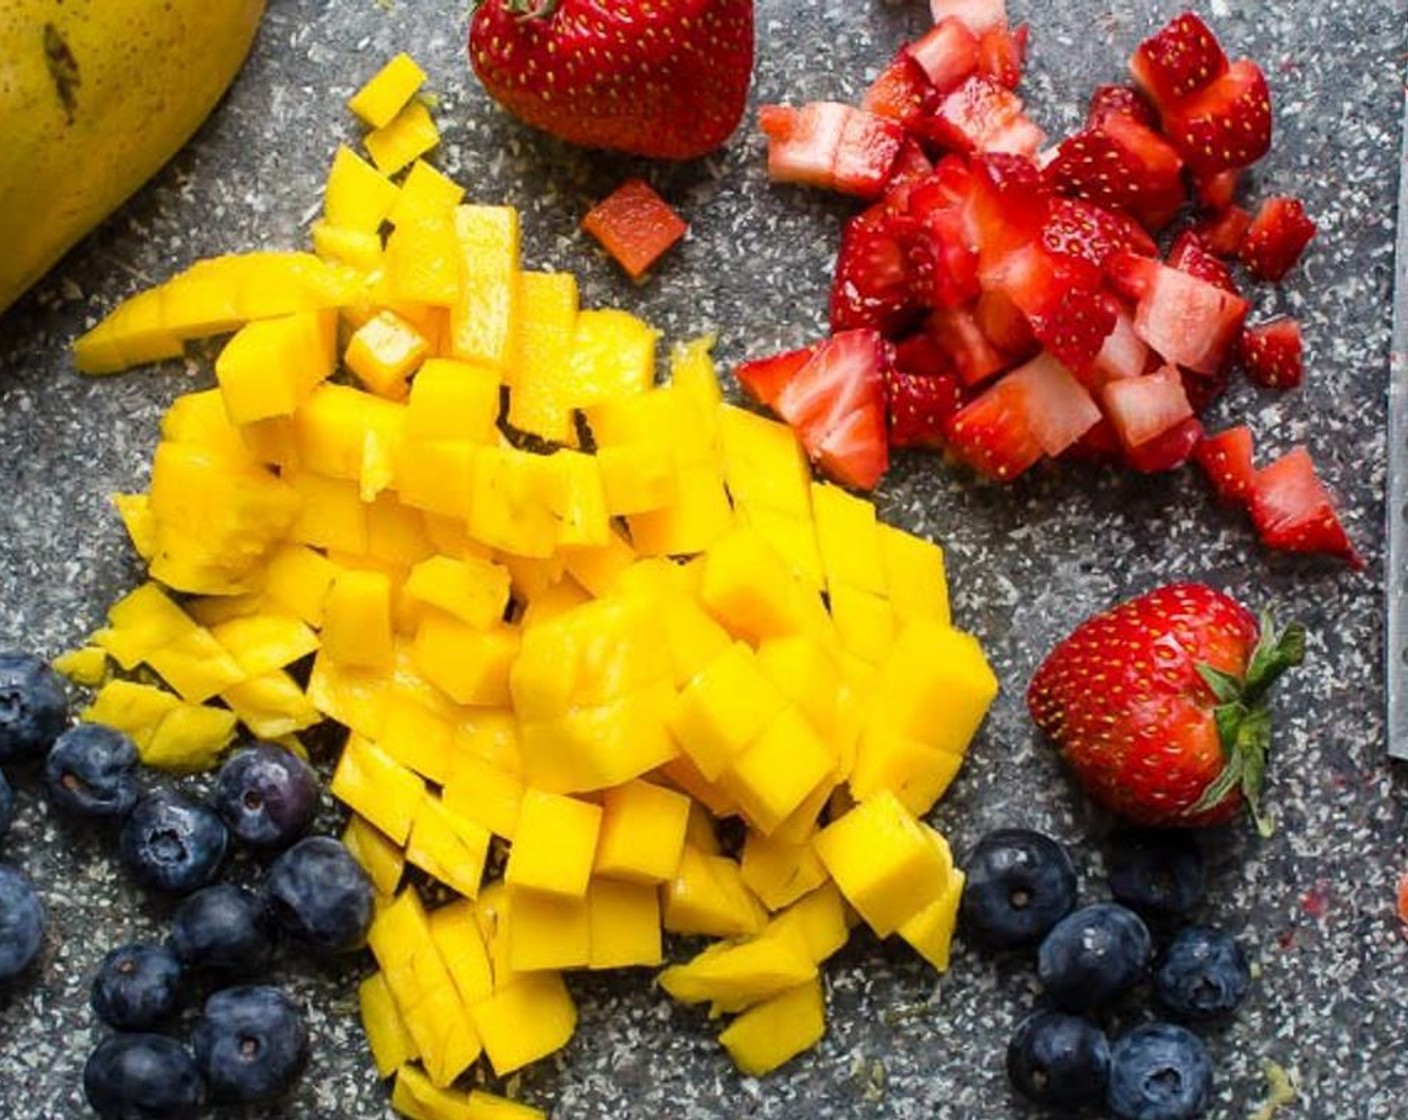 step 7 About 1 hour before serving, make the fruit salad. In a small bowl, combine the Mango (1/2 cup), Fresh Blueberry (1/2 cup) and Fresh Strawberry (1/2 cup). Sprinkle with Granulated Sugar (1/2 Tbsp) and Dark Rum (1 Tbsp) and toss to coat.